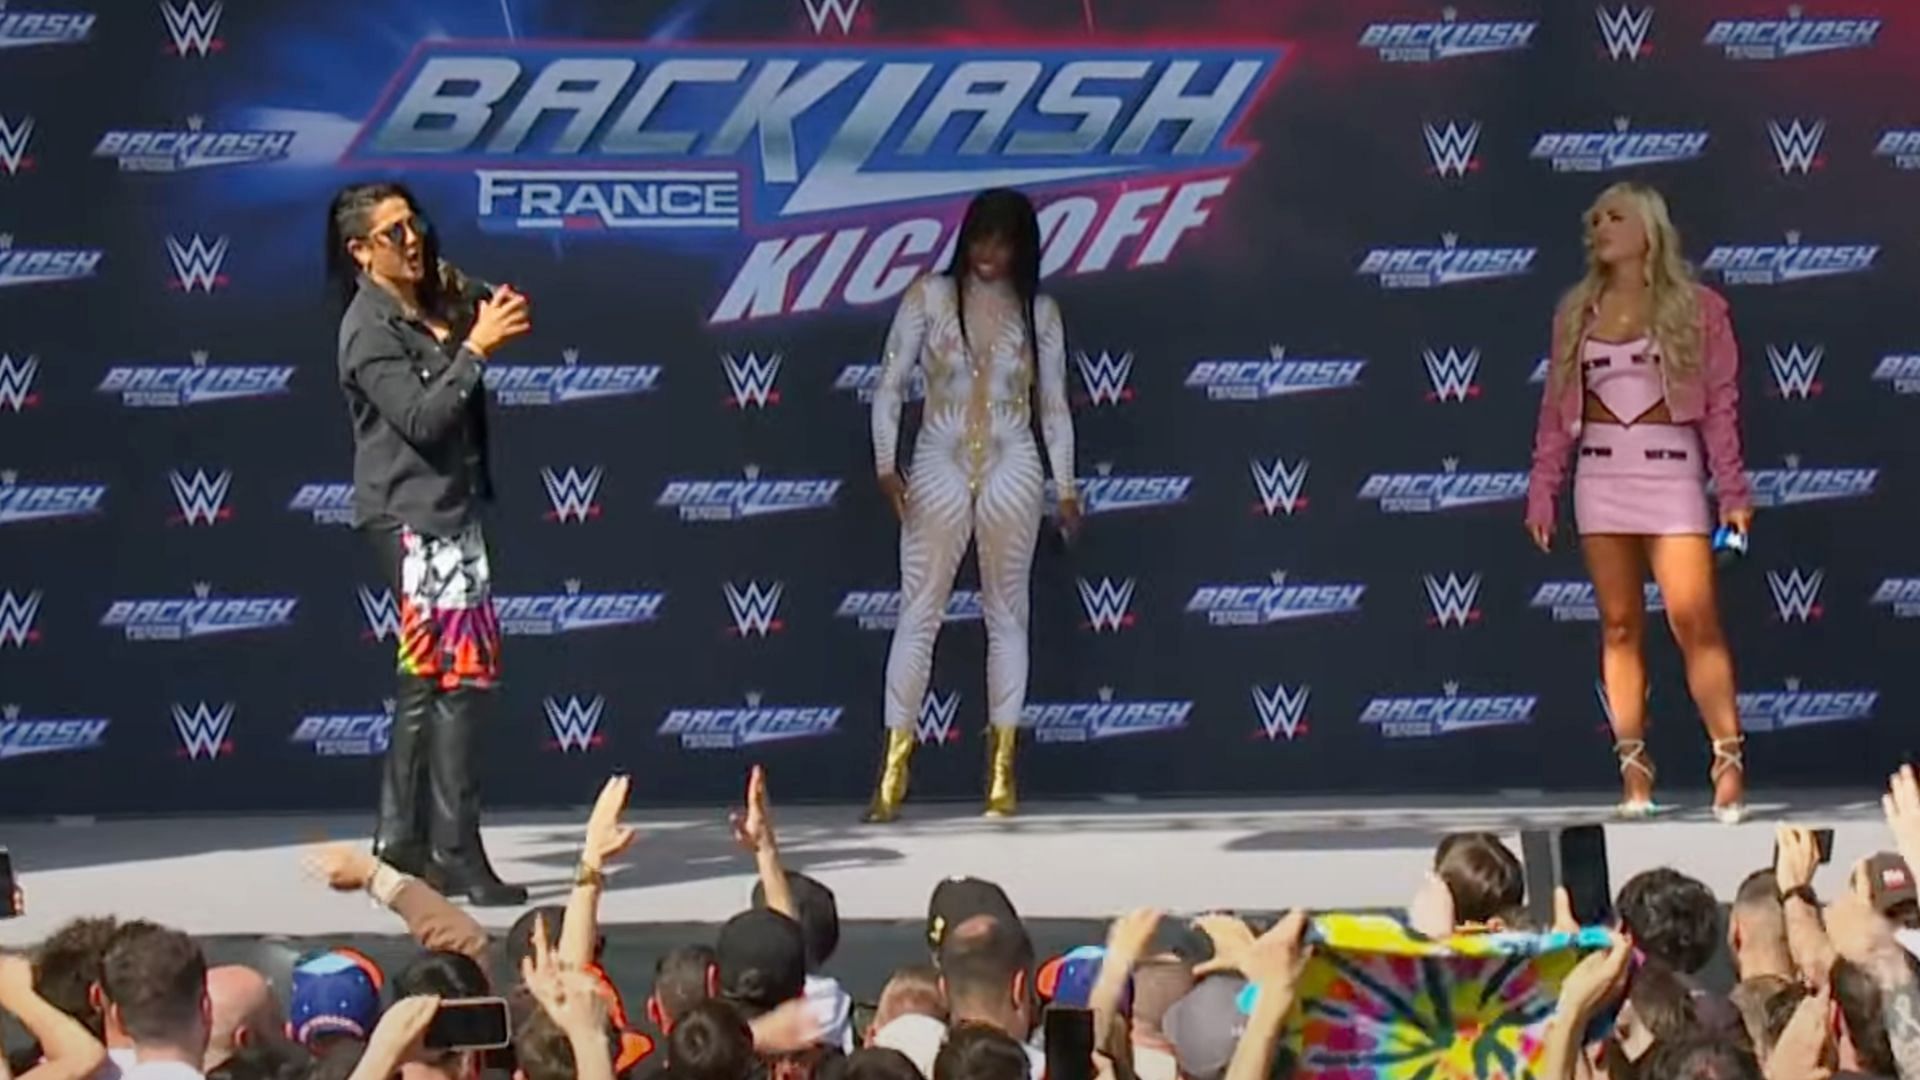 There was a hilarious botch today during the Backlash Kickoff show.